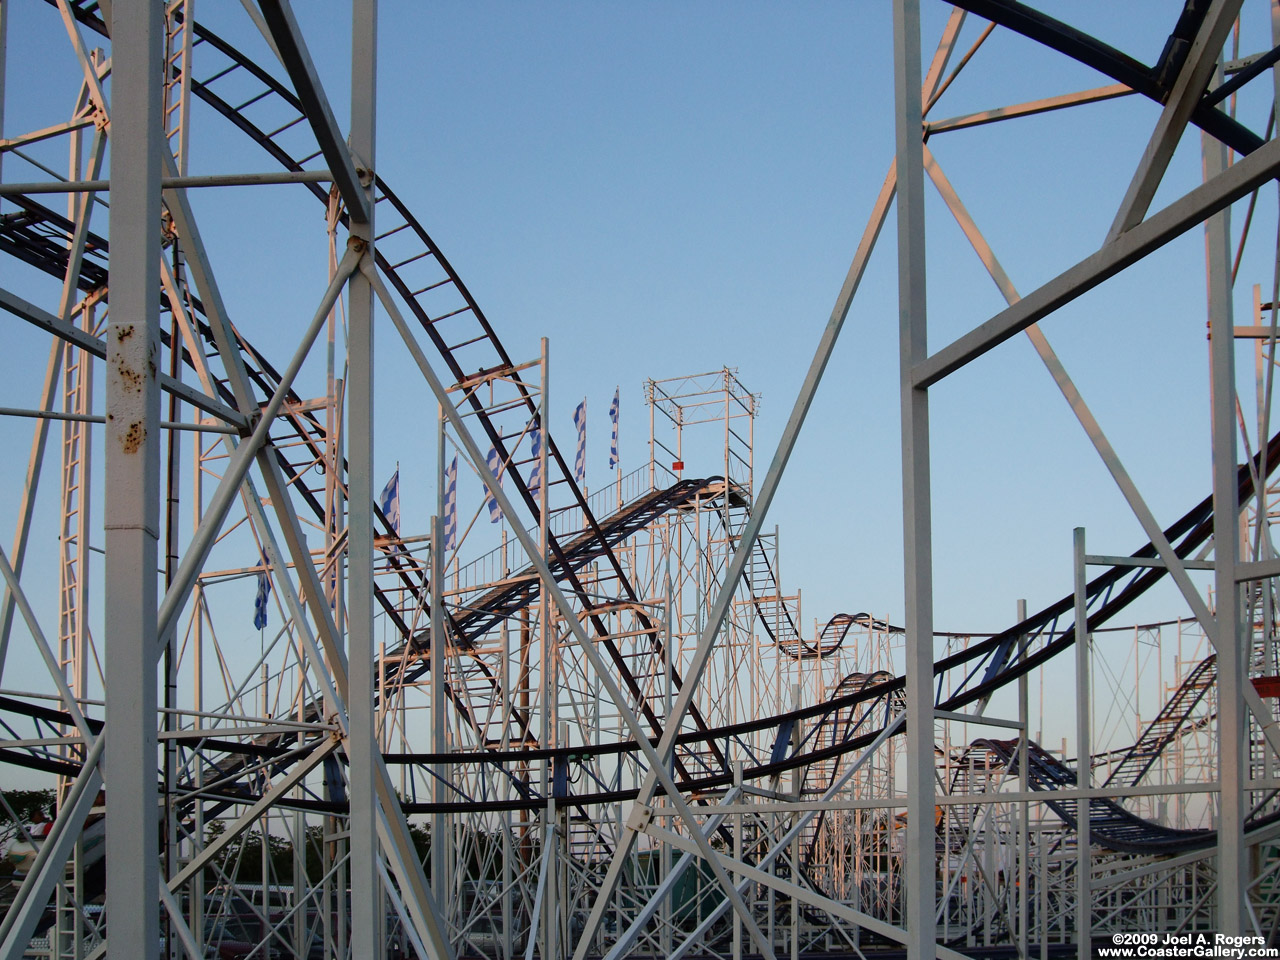 Dense cluster of supports on a steel coaster